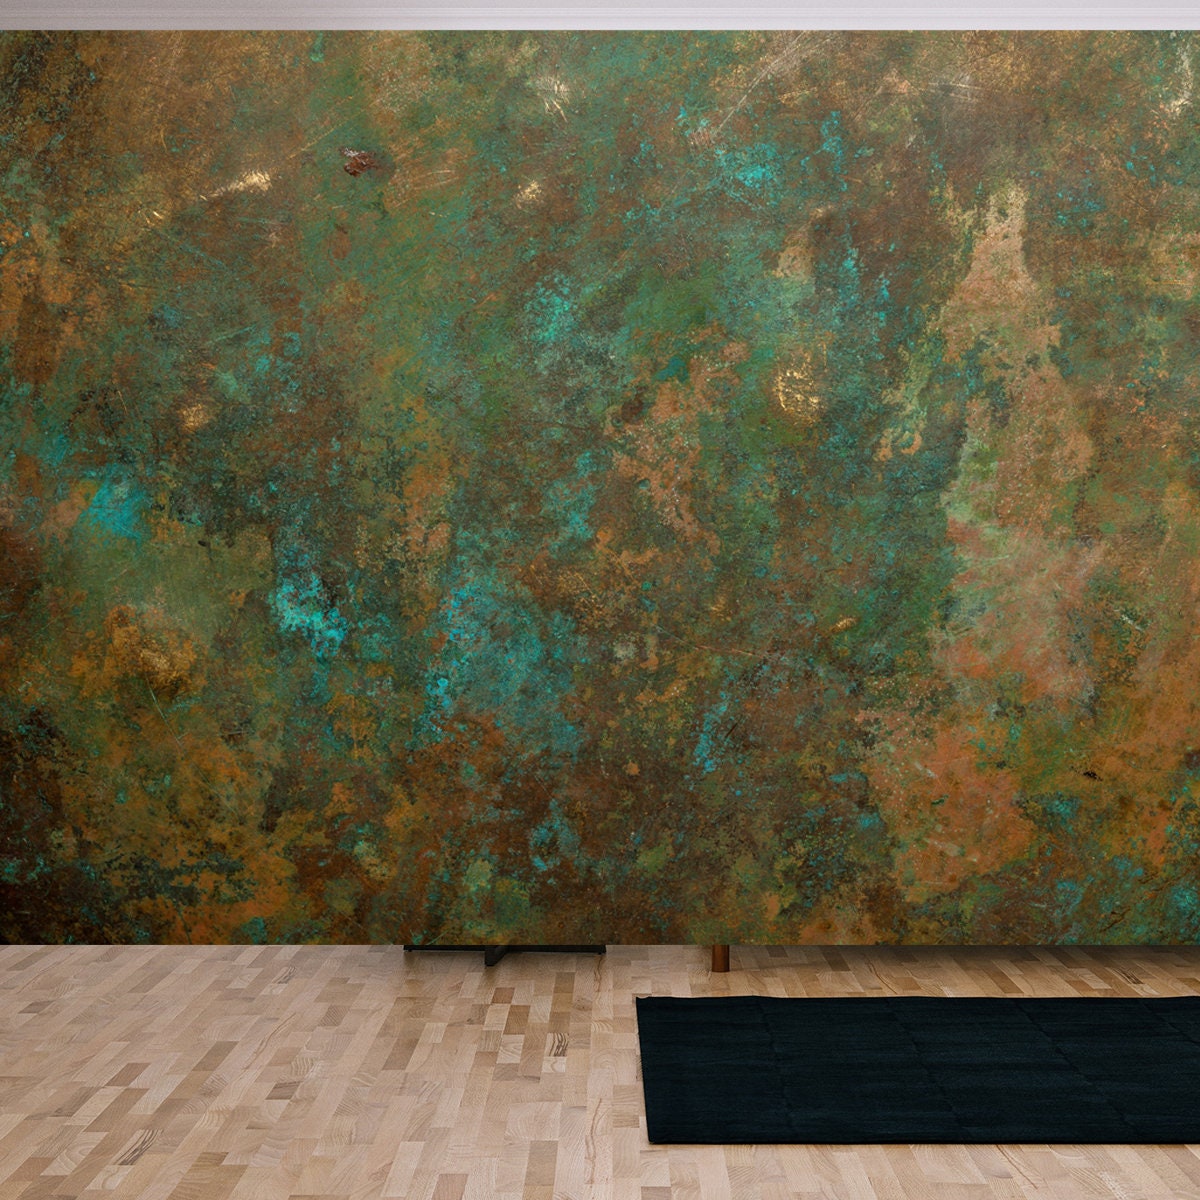 Background Image of Old Copper Vessel Texture Wallpaper Living Room Mural